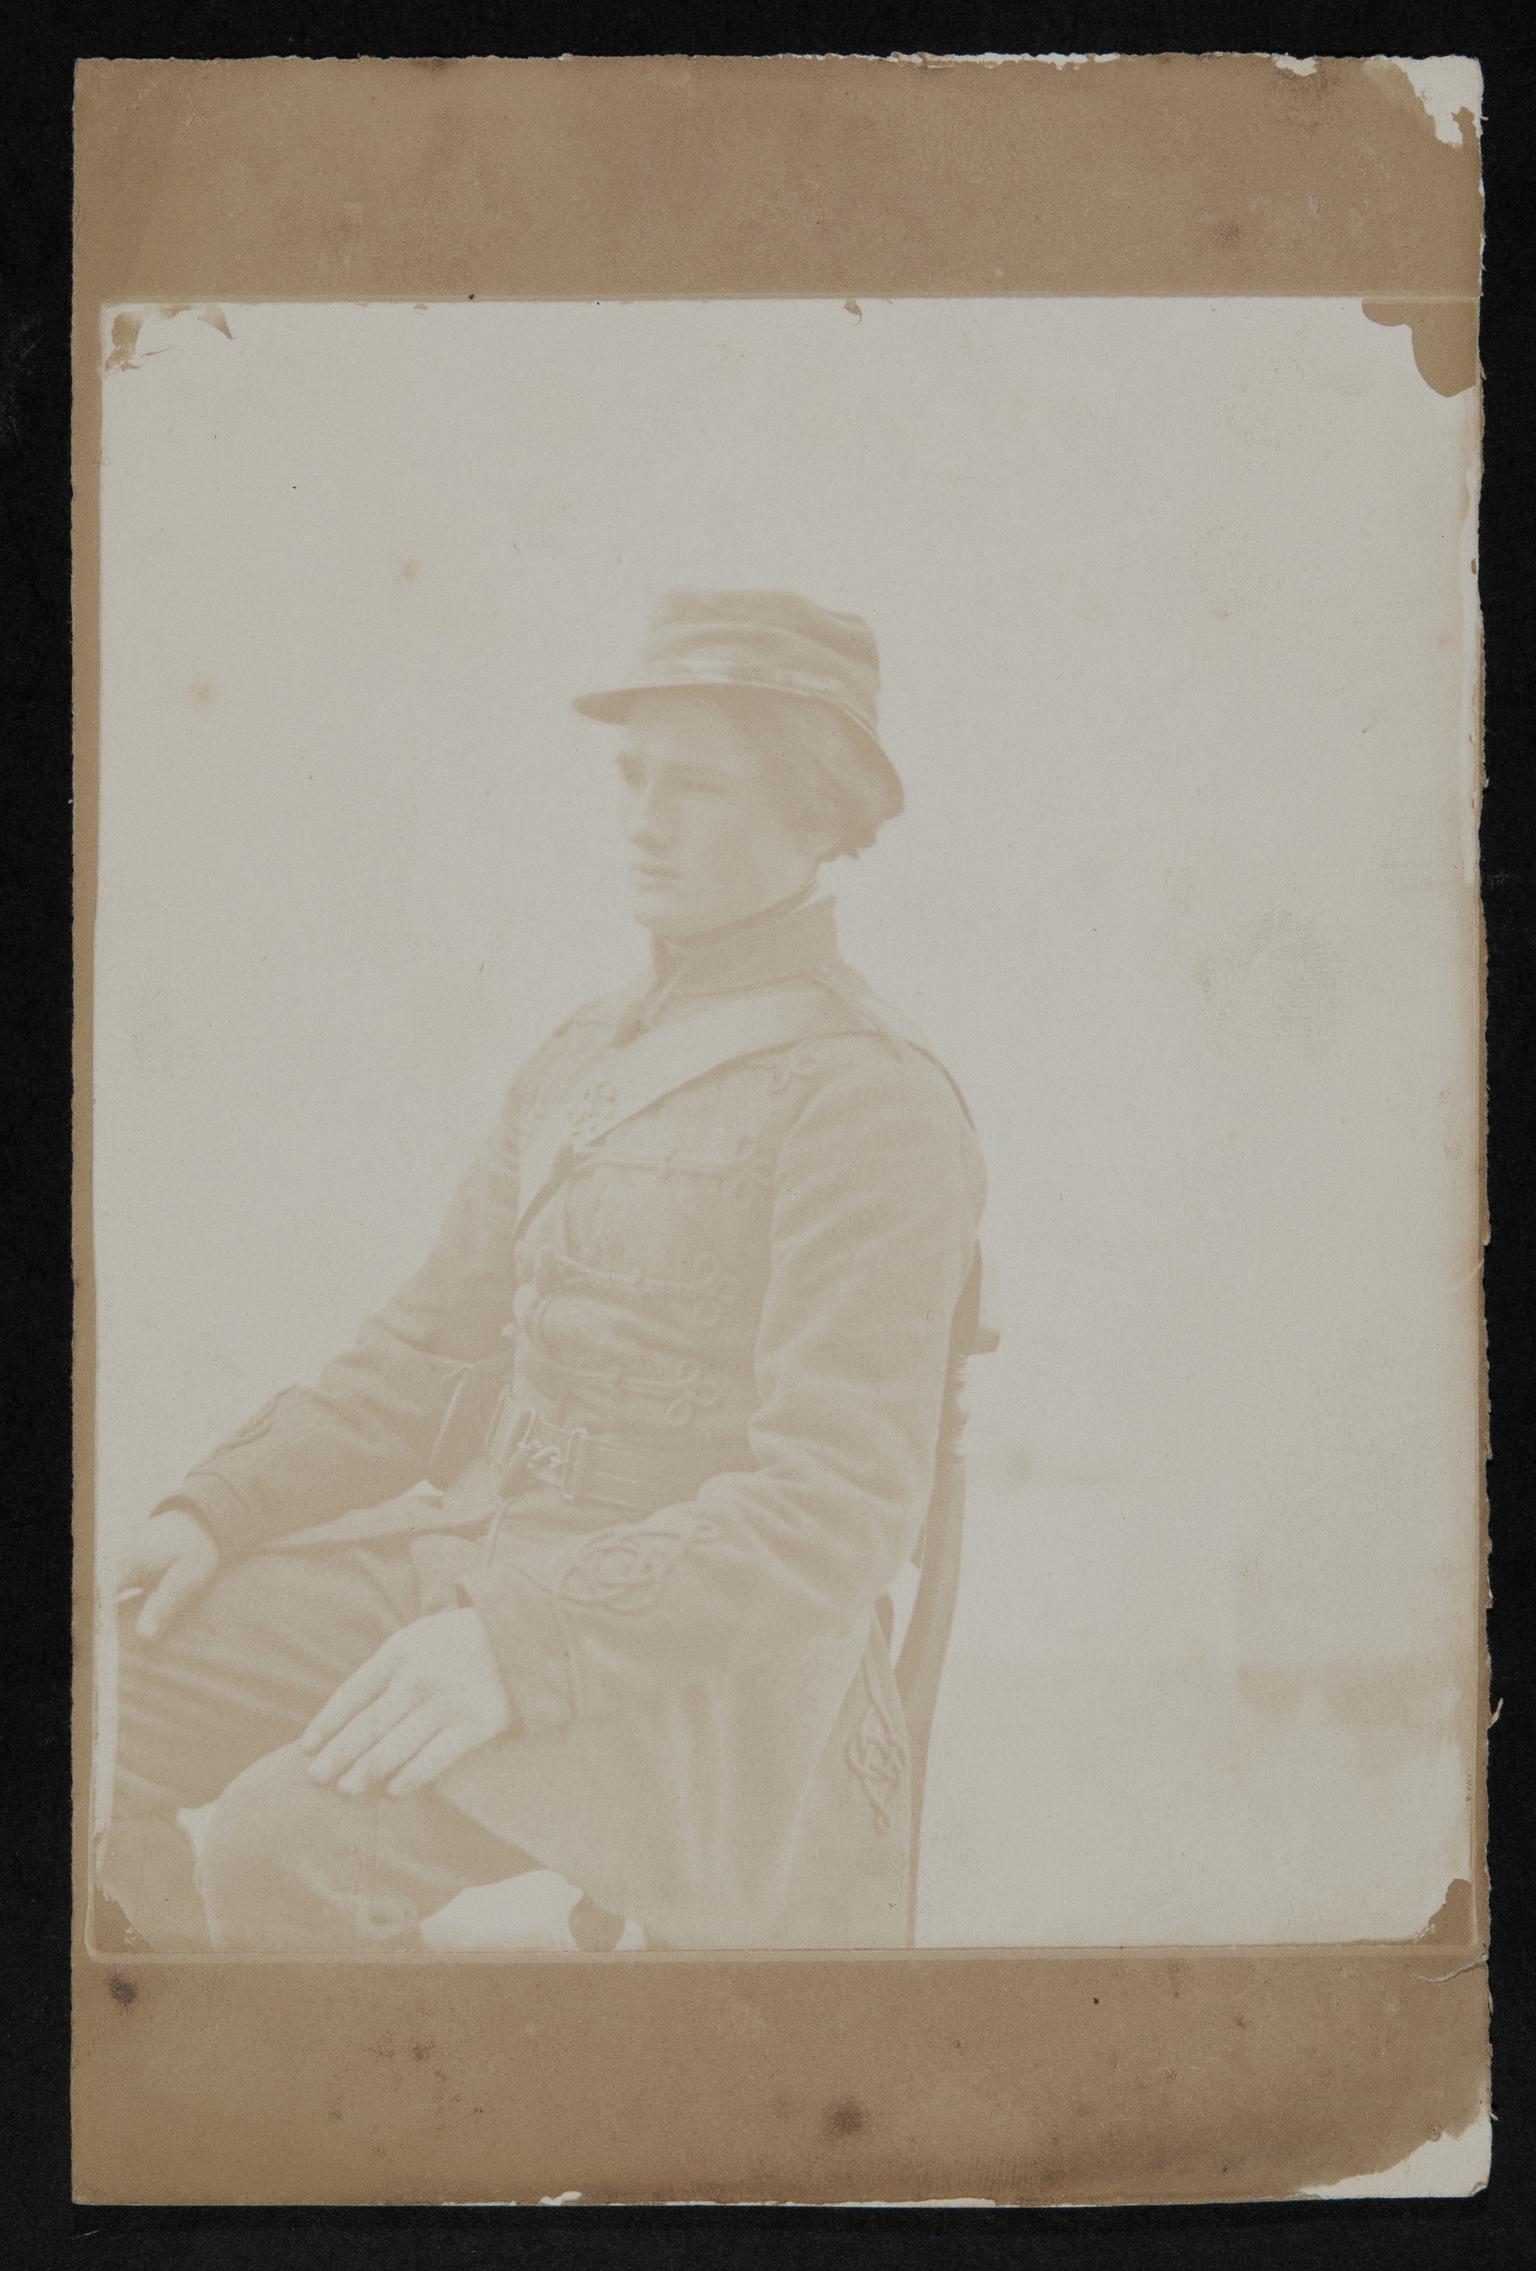 Willy Llewelyn, photograph